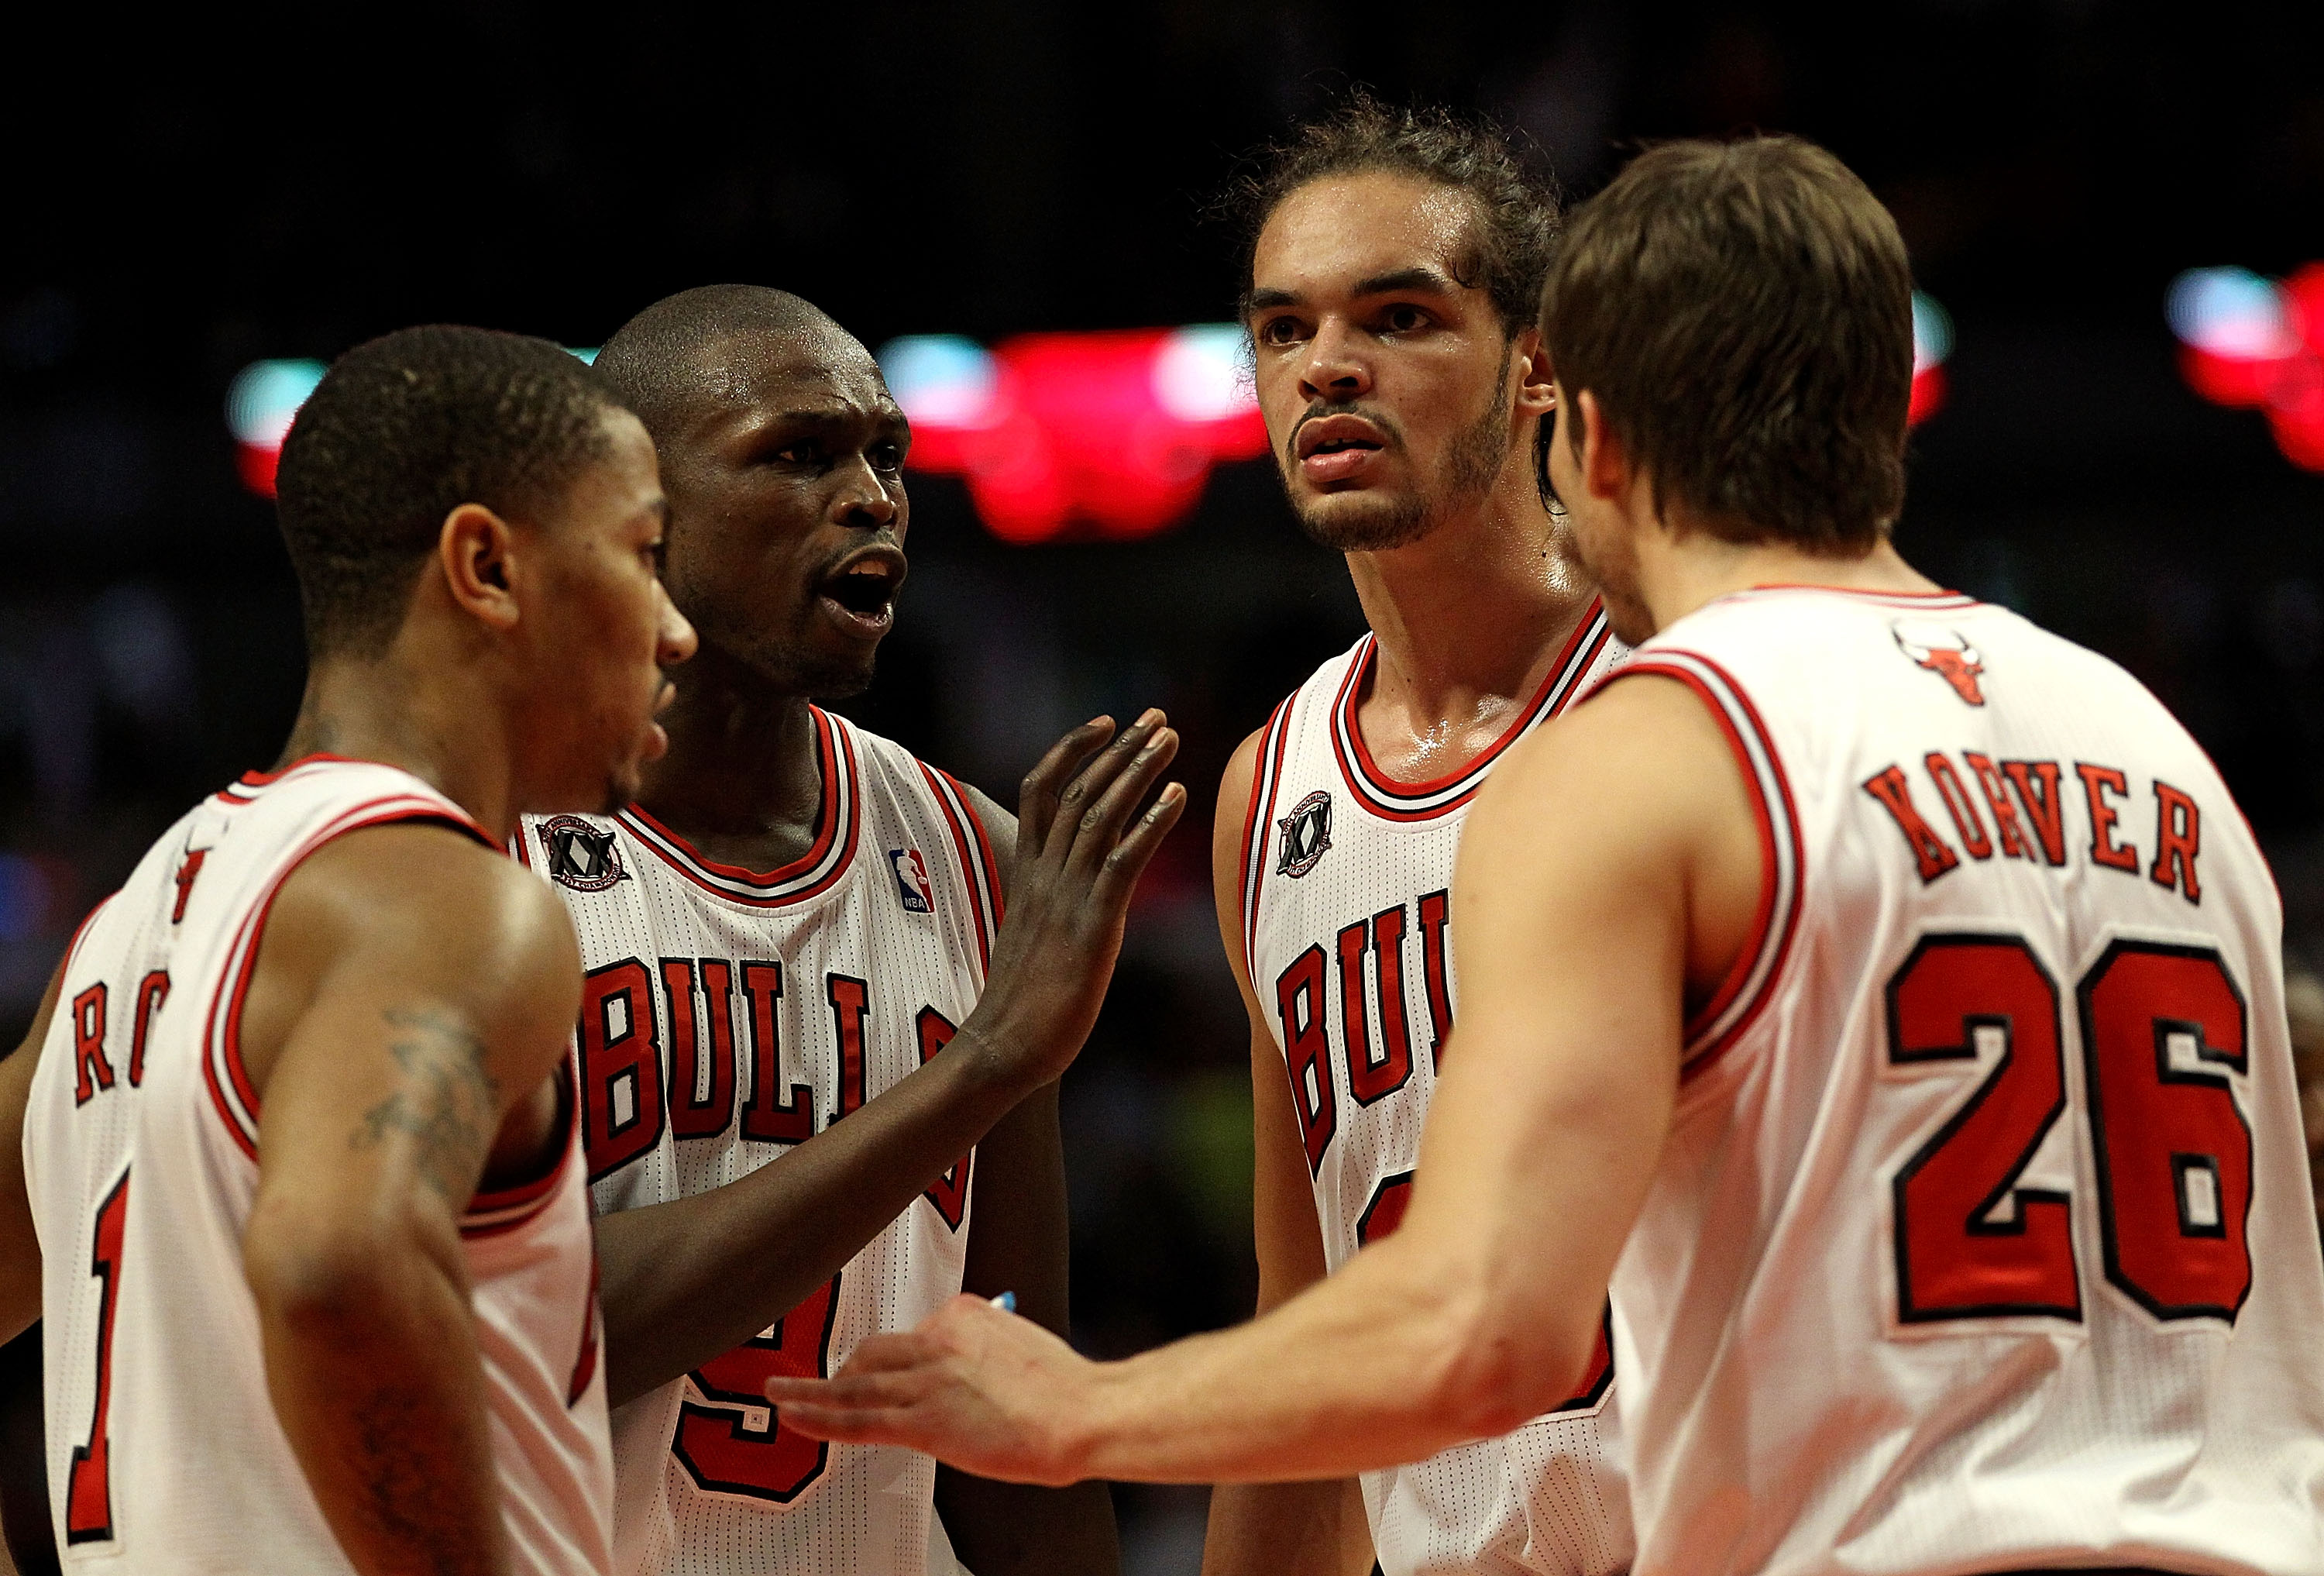 CHICAGO, IL - MARCH 25: (L-R) Derrick Rose #1, Loul Deng #9, Joakim Noah #13 and Kyle Korver #26 of the Chicago Bulls gather to talk during a game against the Memphis Grizzlies at the United Center on March 25, 2011 in Chicago, Illinois. The Bulls defeate